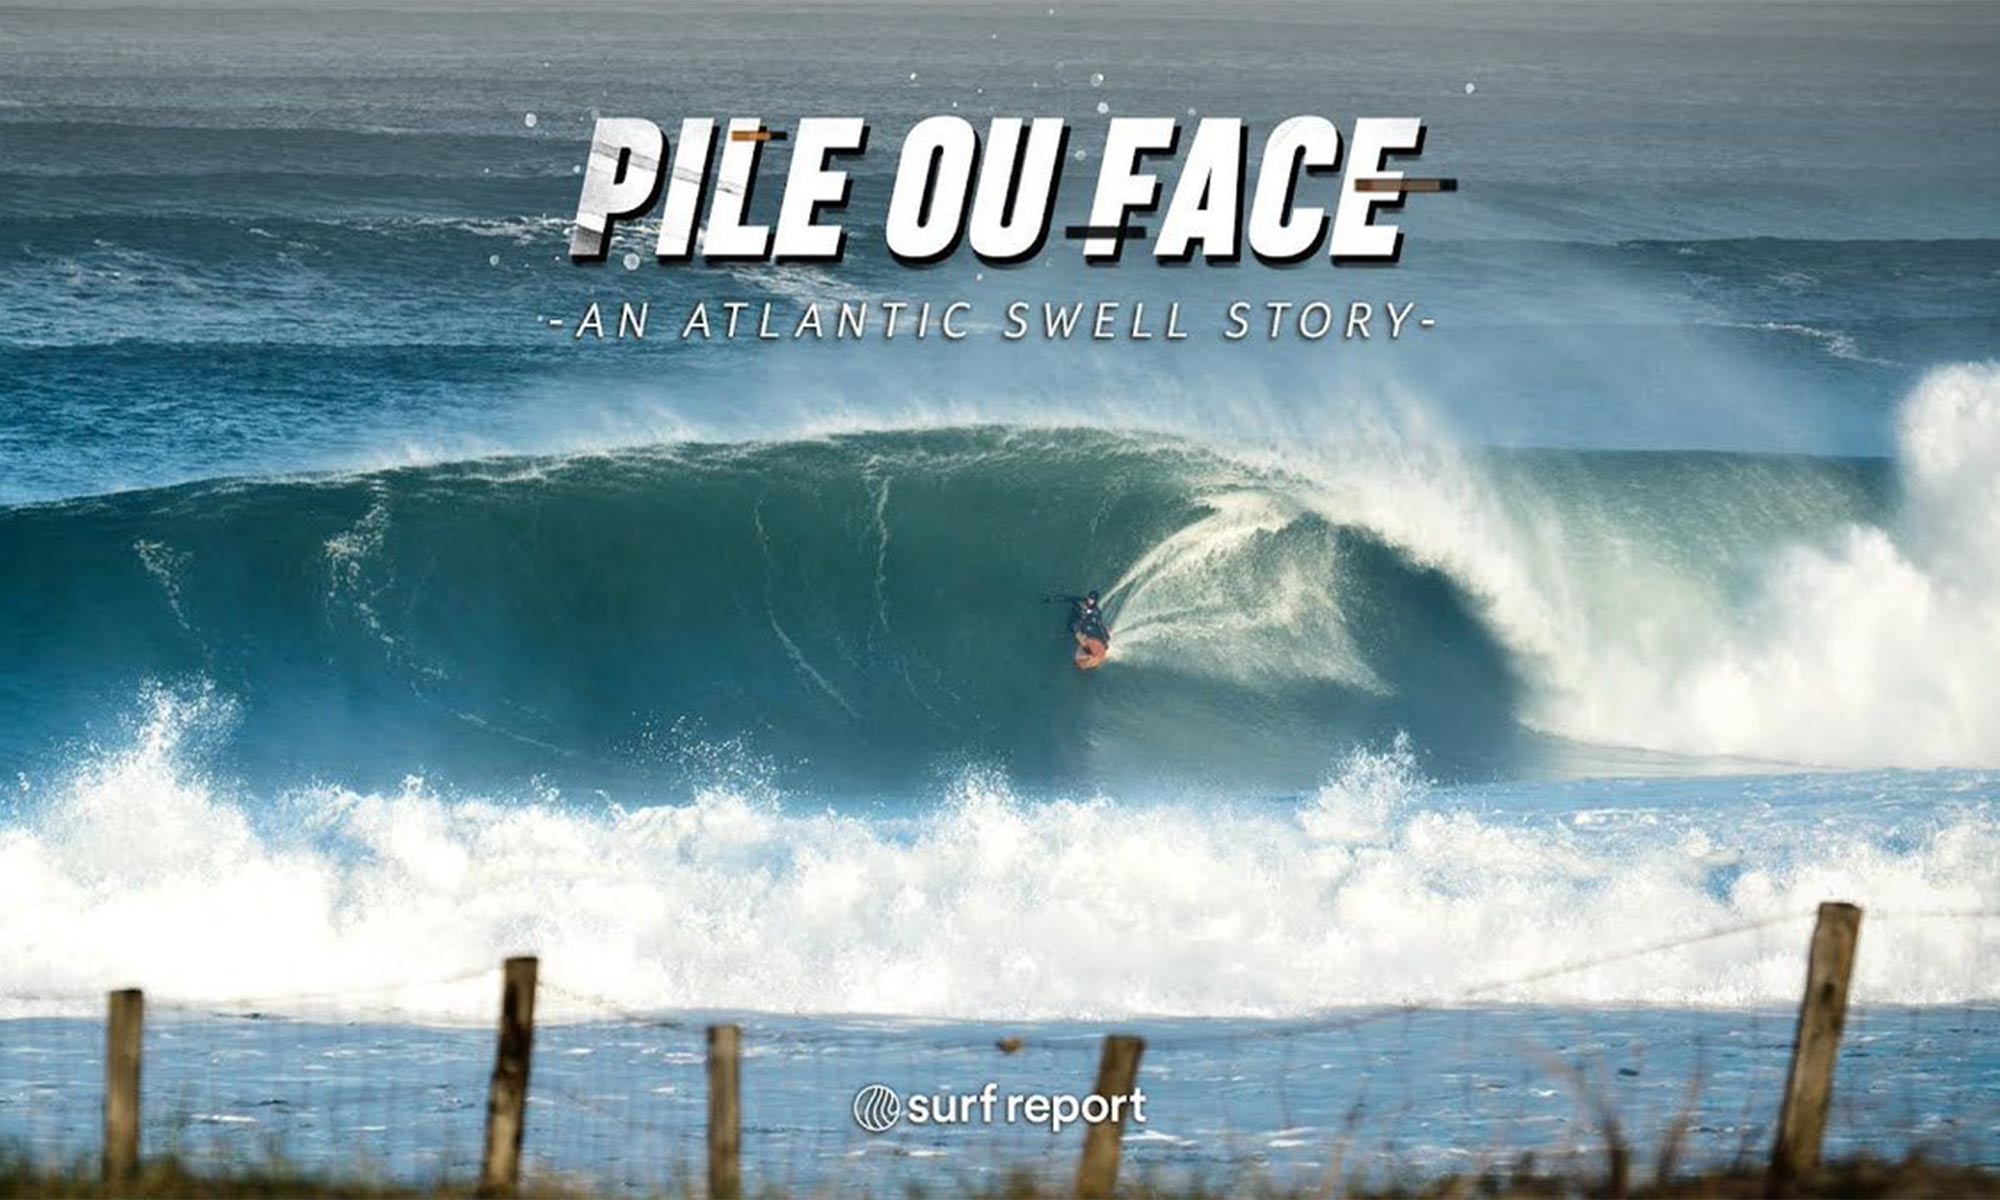 Pile ou face, an Atlantic Swell Story